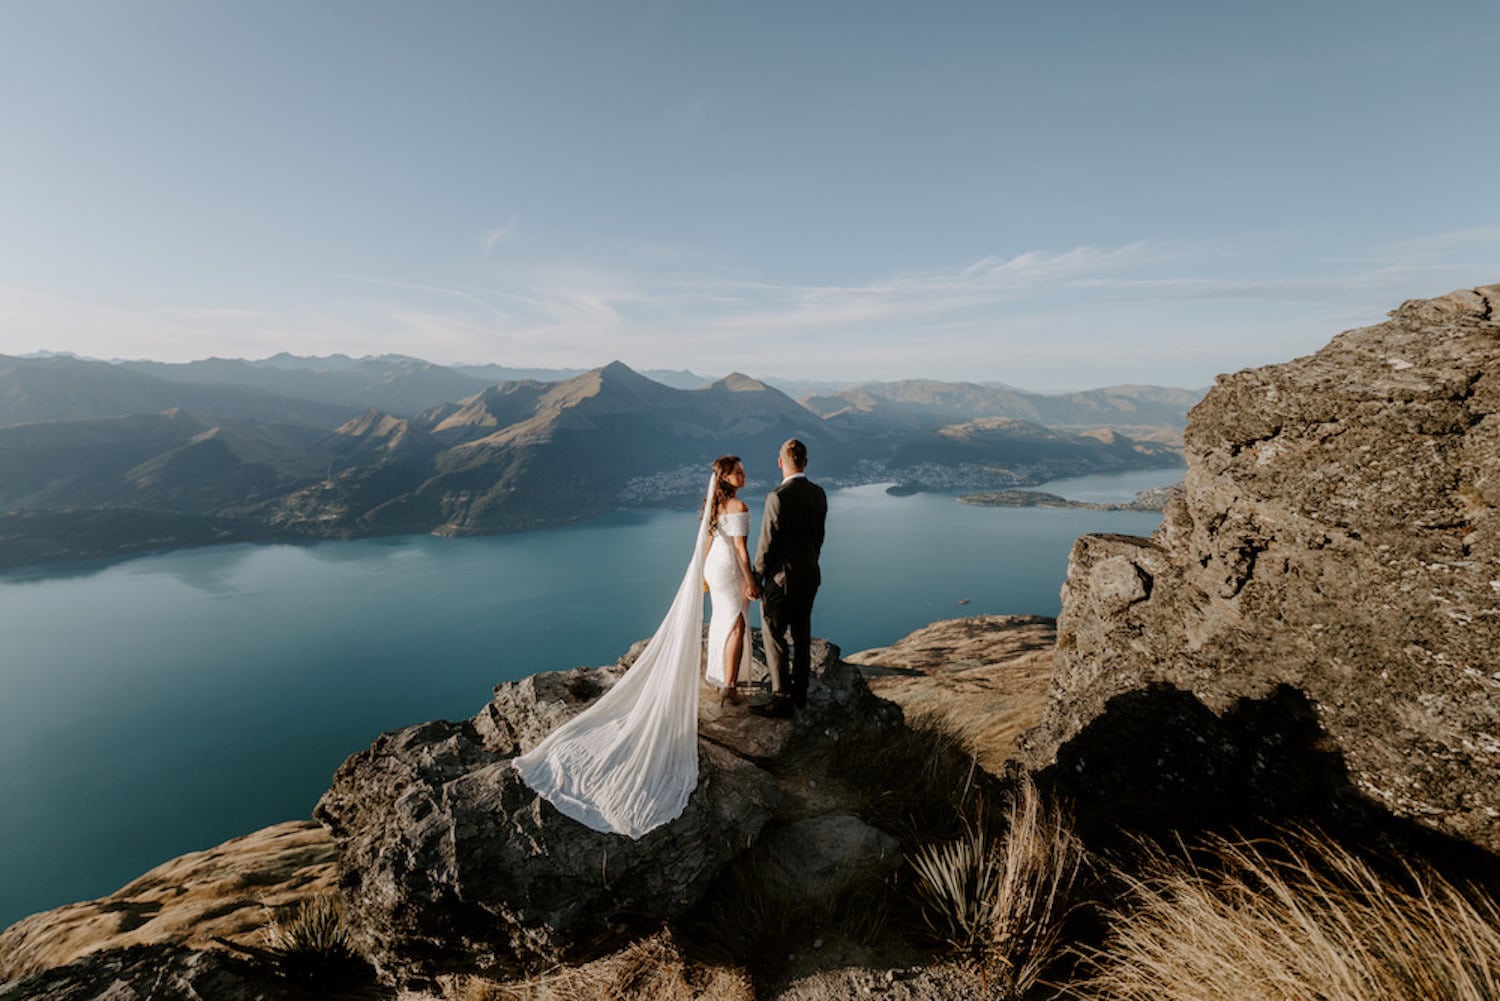 wedding couple standing on a rock over looking an alpine lake